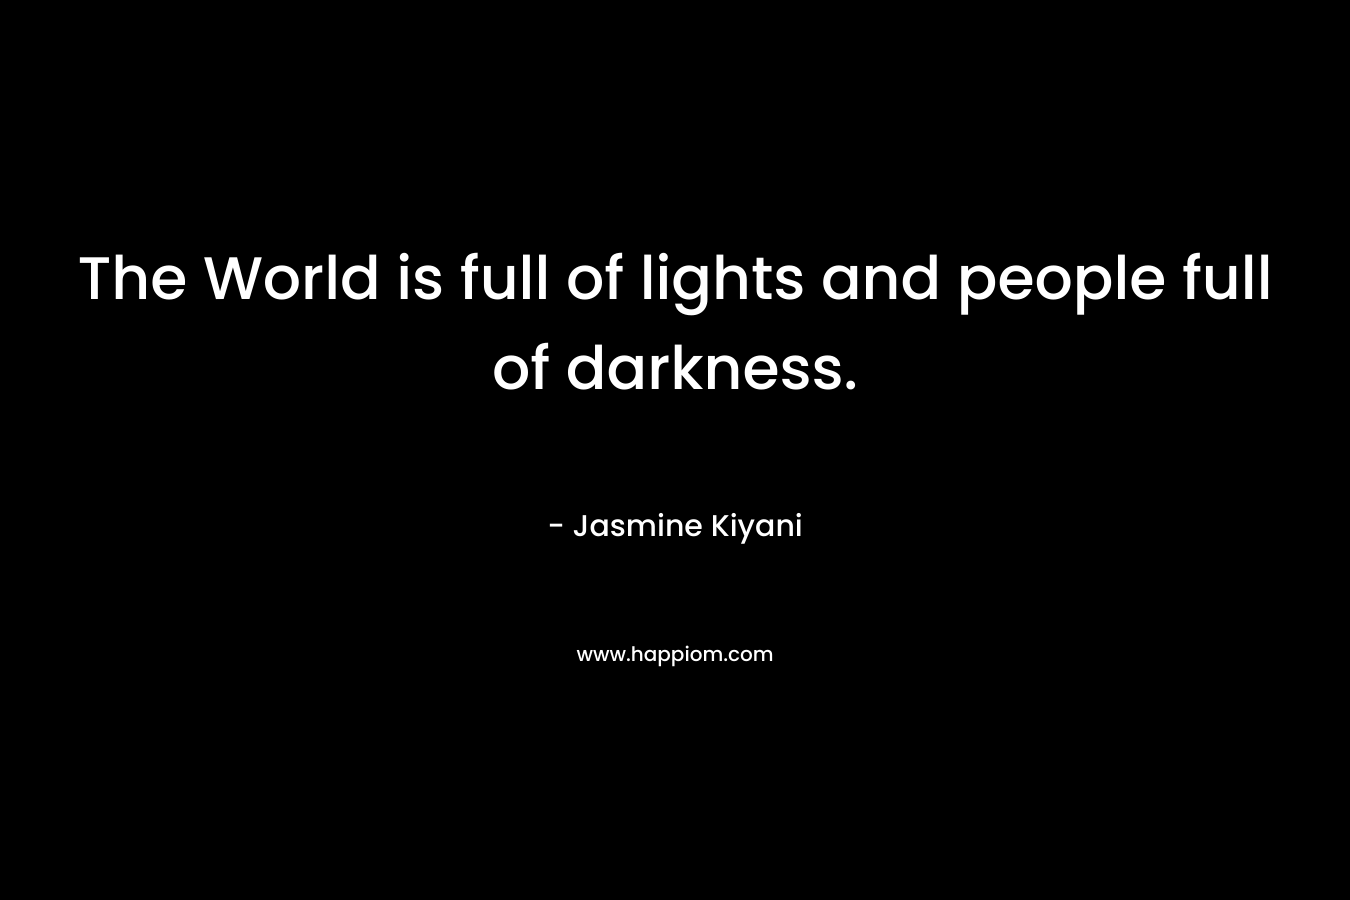 The World is full of lights and people full of darkness.